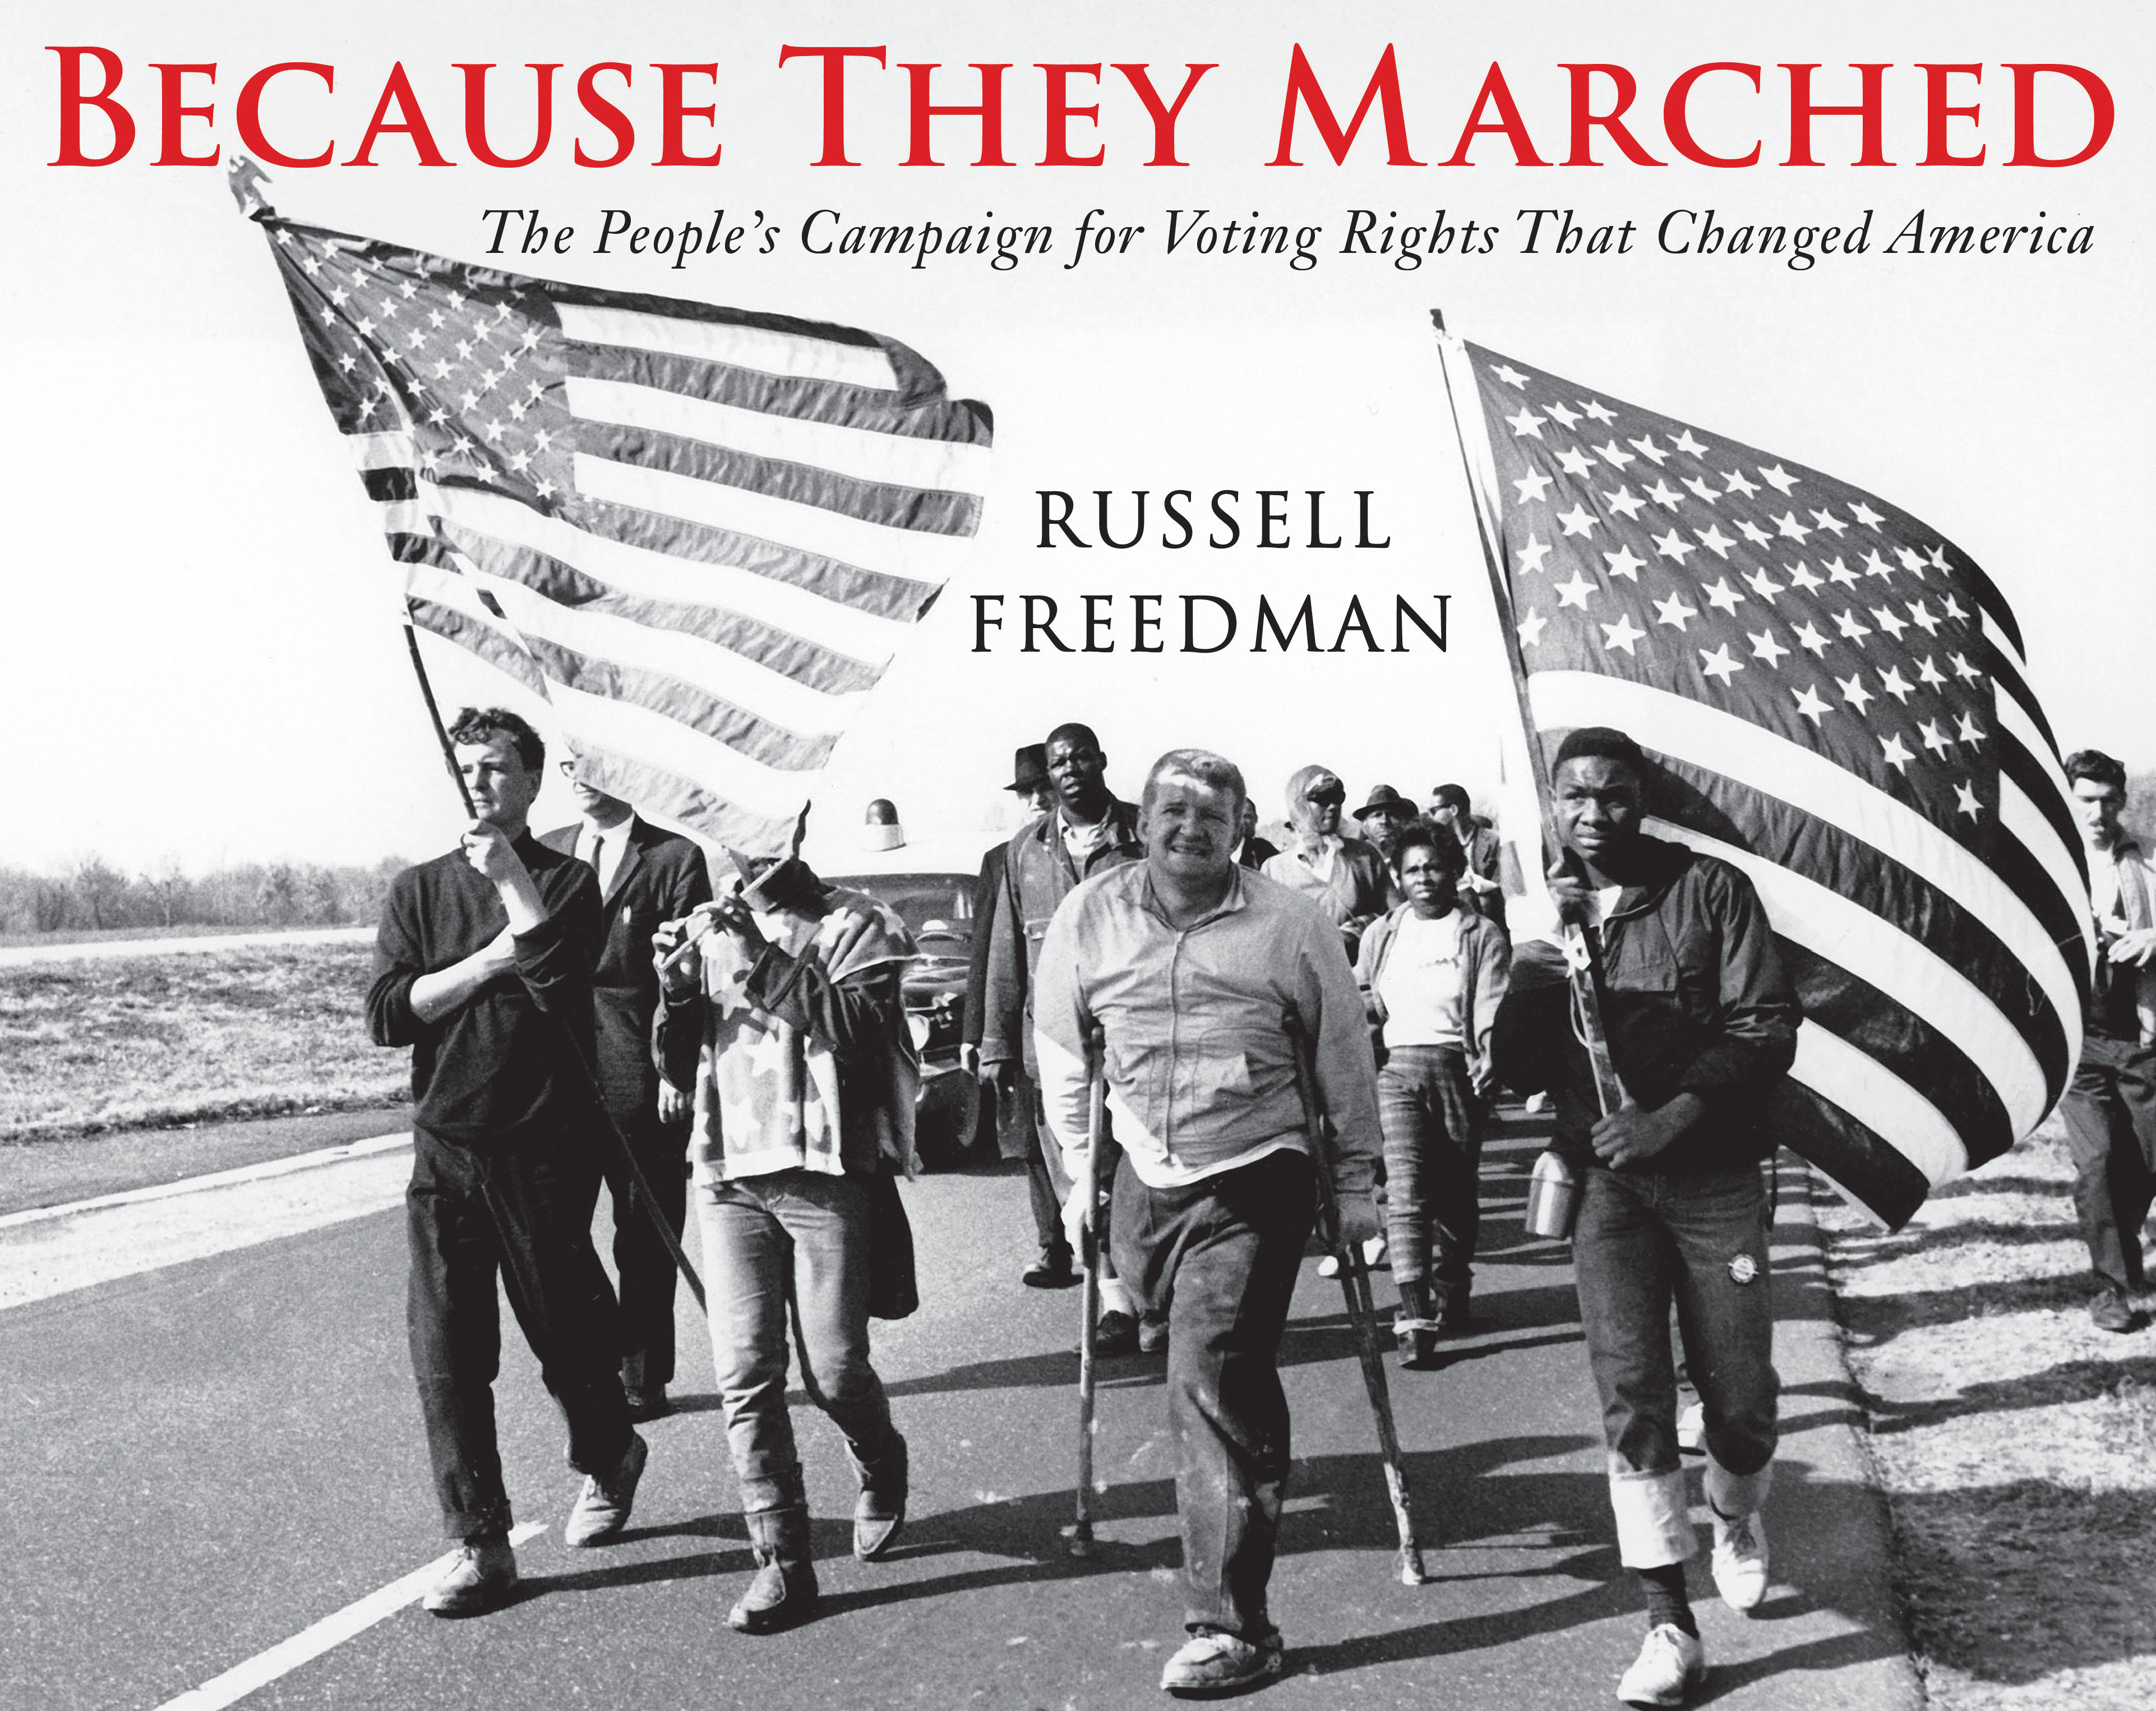 Because They Marched (Hardcover Book)